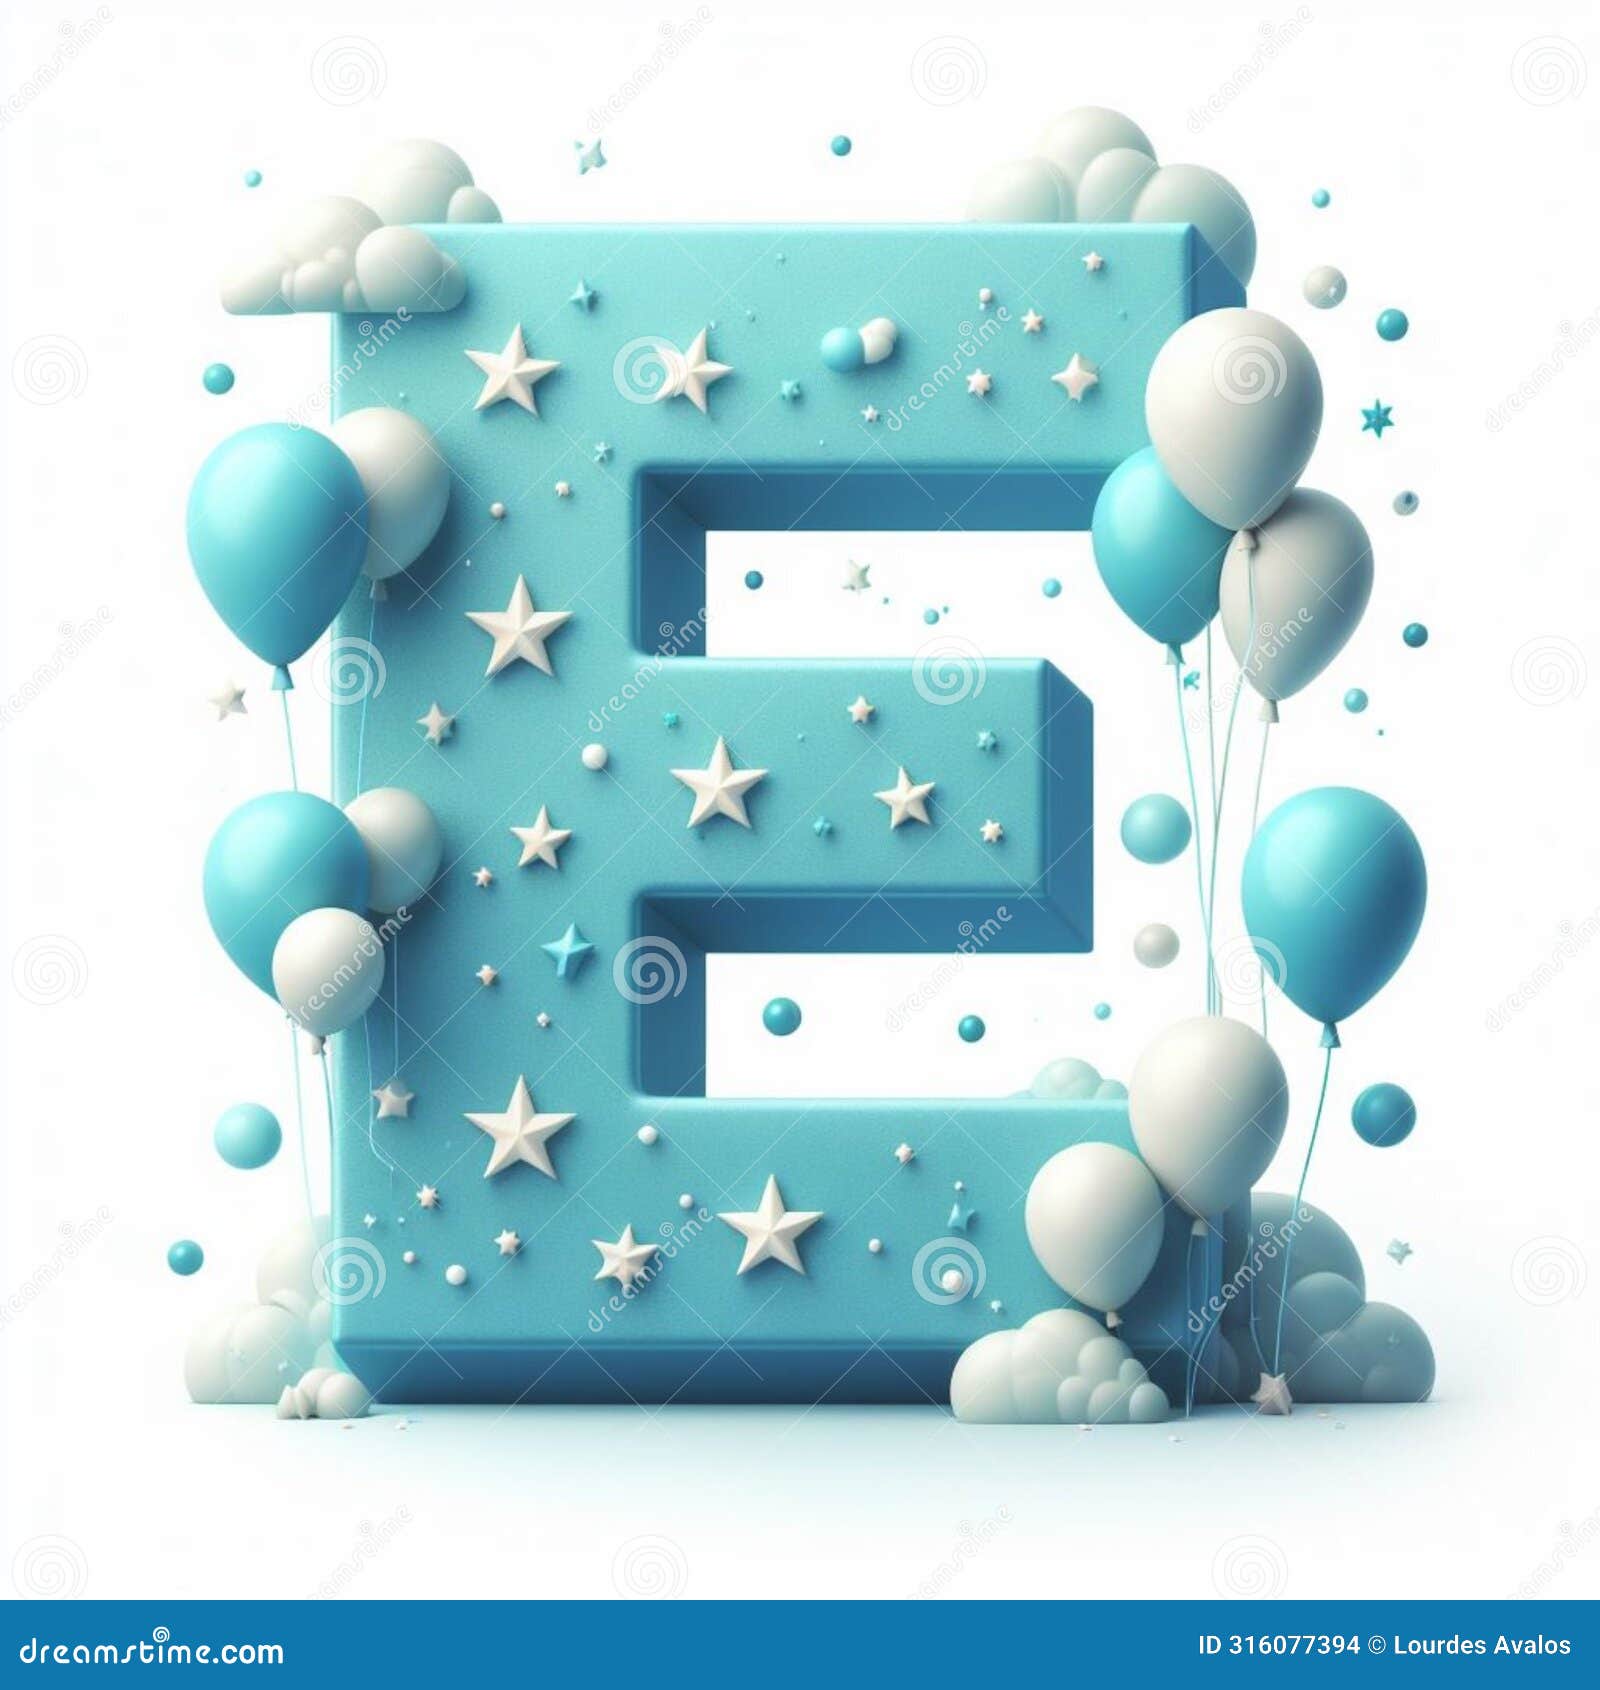 letter e in  with celestial s such as balloons and stars, ideal for creative projects